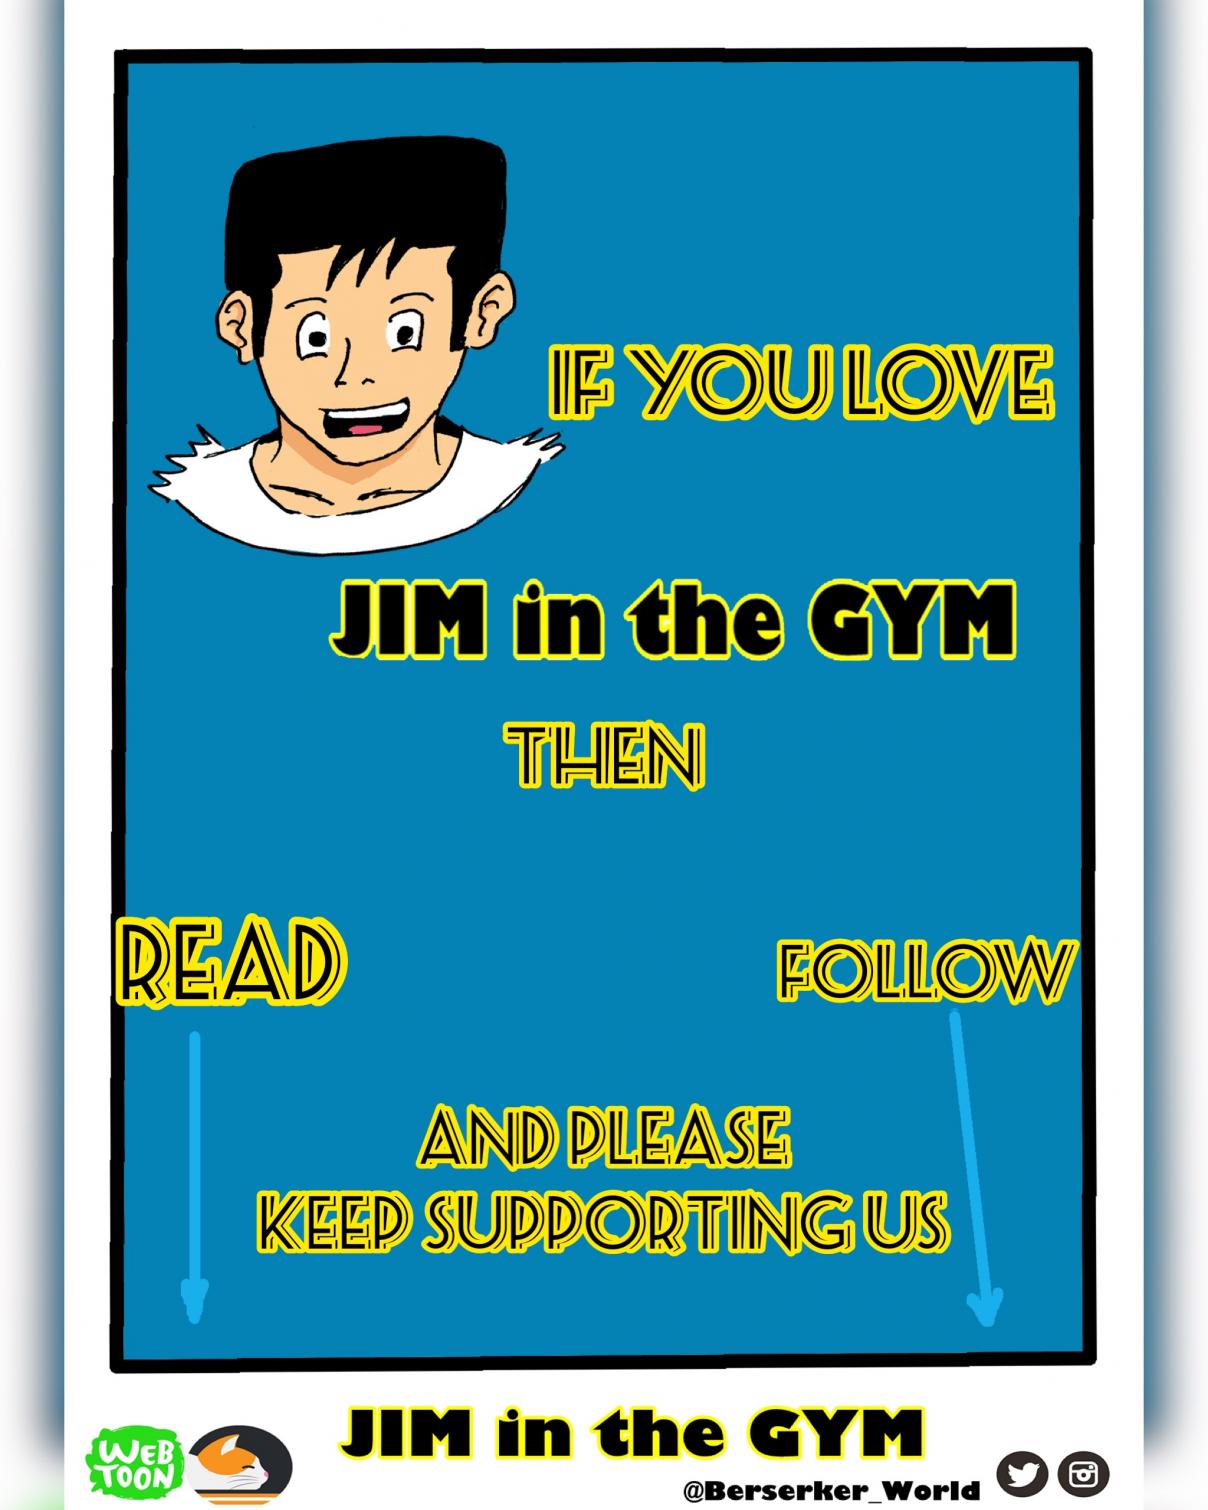 Jim in the Gym Vol. 1 Ch. 11 Pre Workout!!